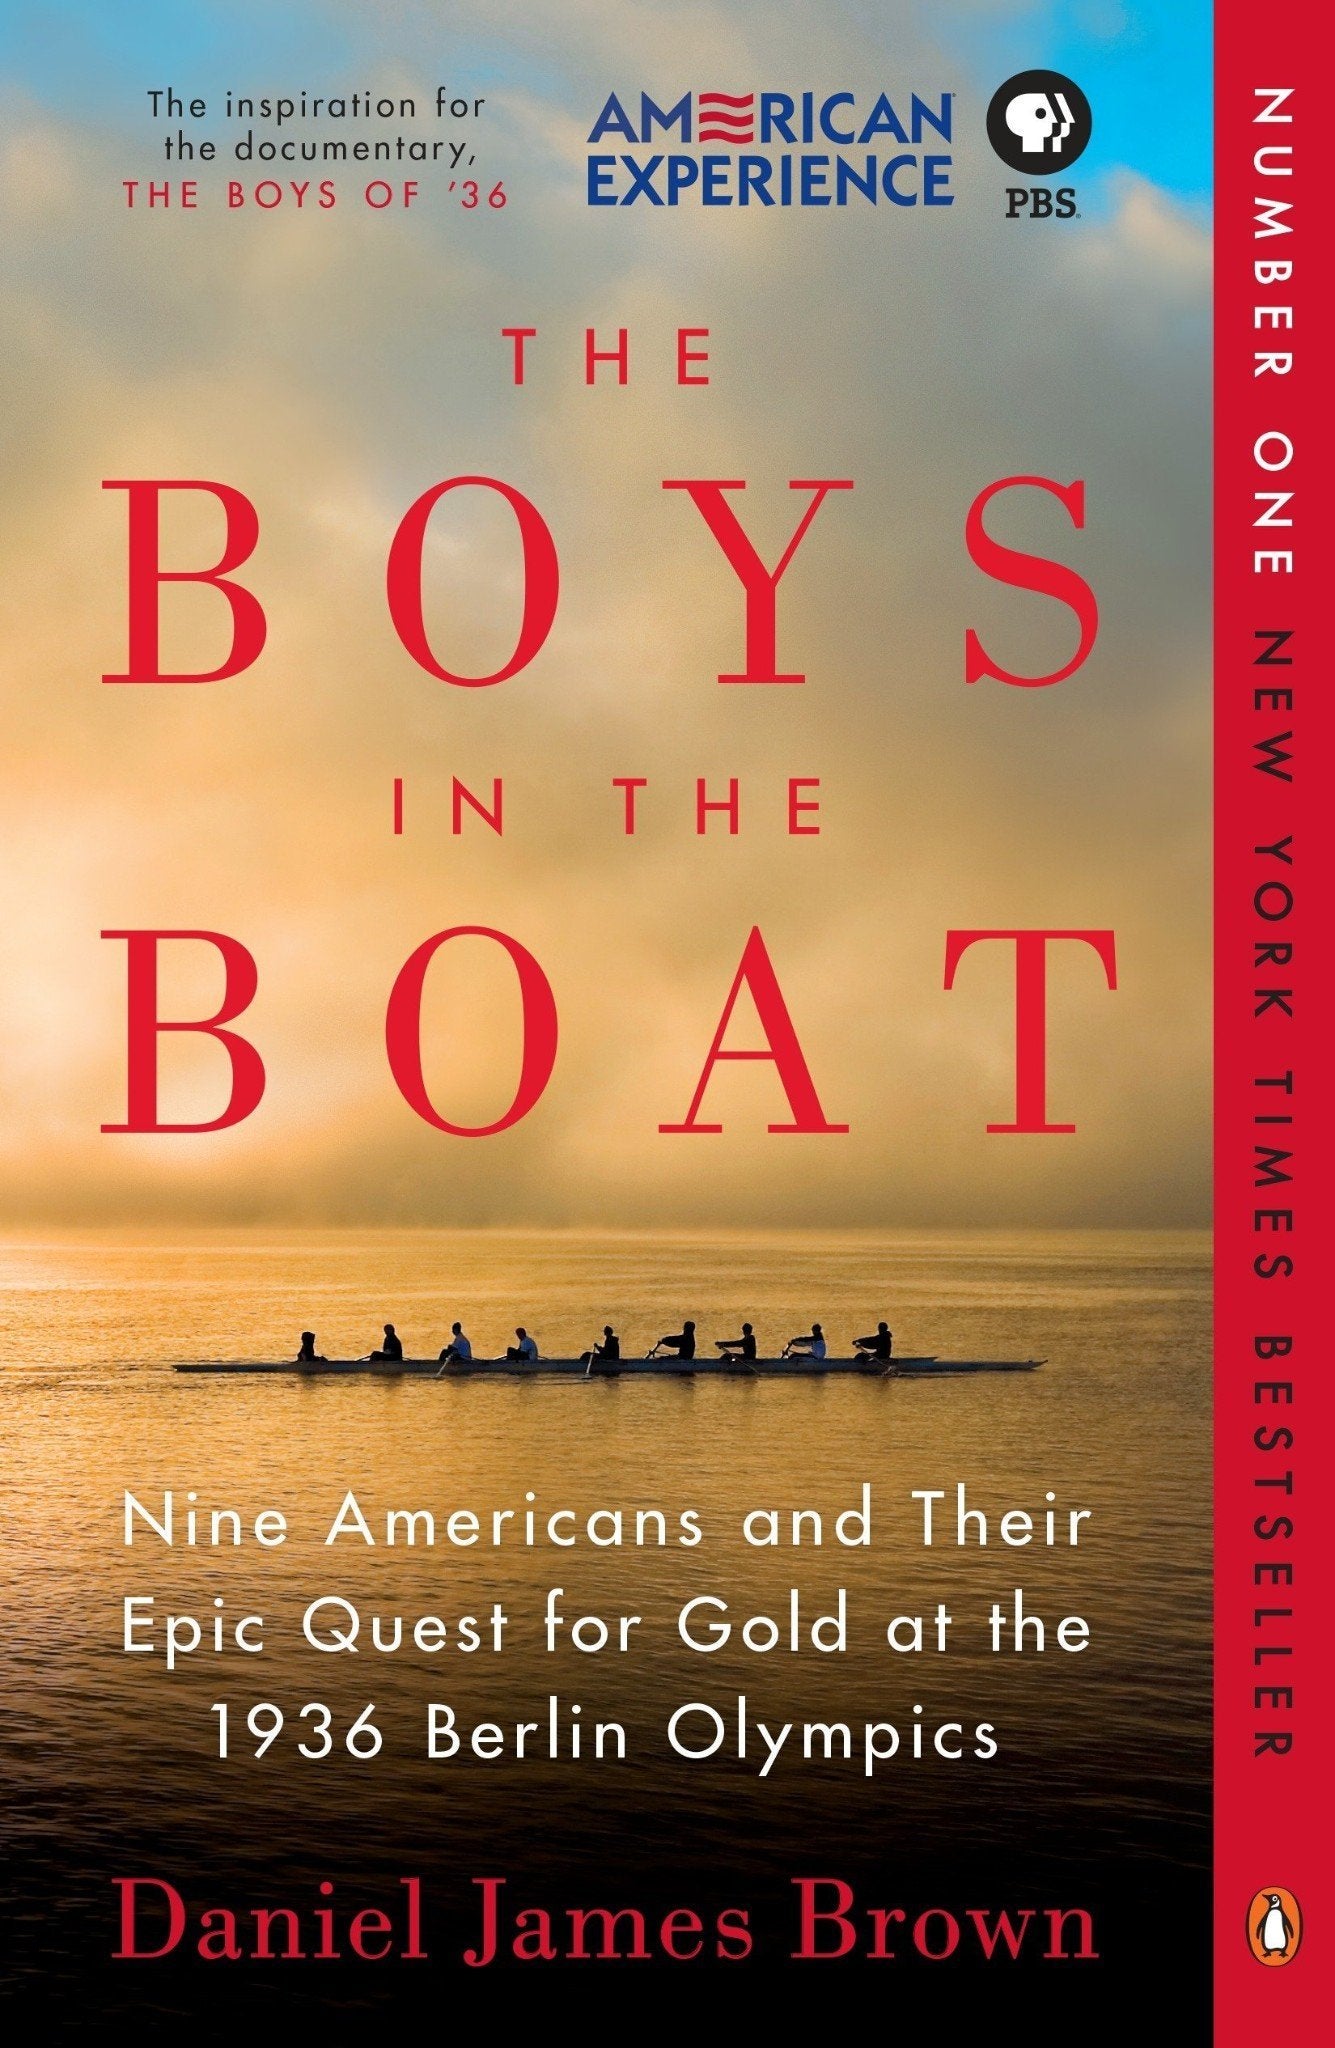 Paperback- The Boys in the Boat: The True Story of an American Team... by Brown - LV'S Global Media